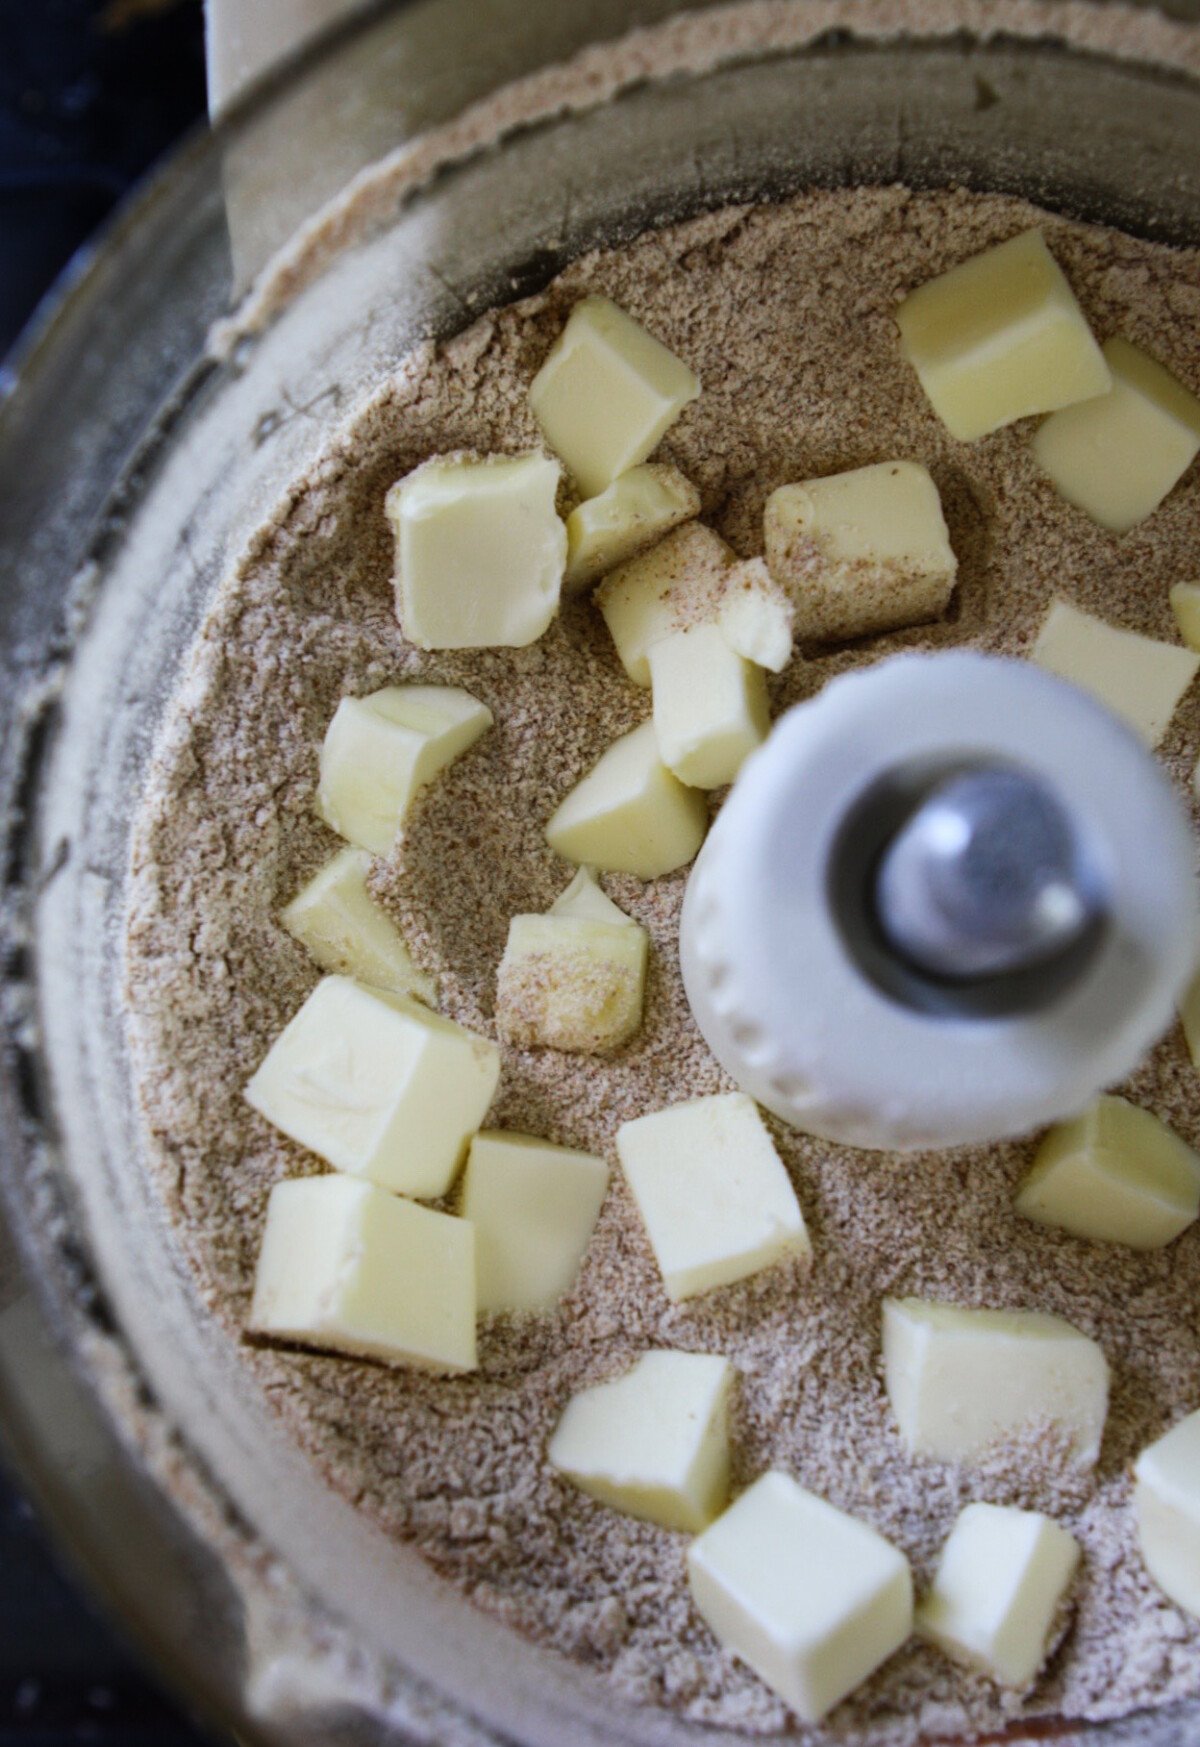 Photograph of whole wheat graham cracker dough in a food processor